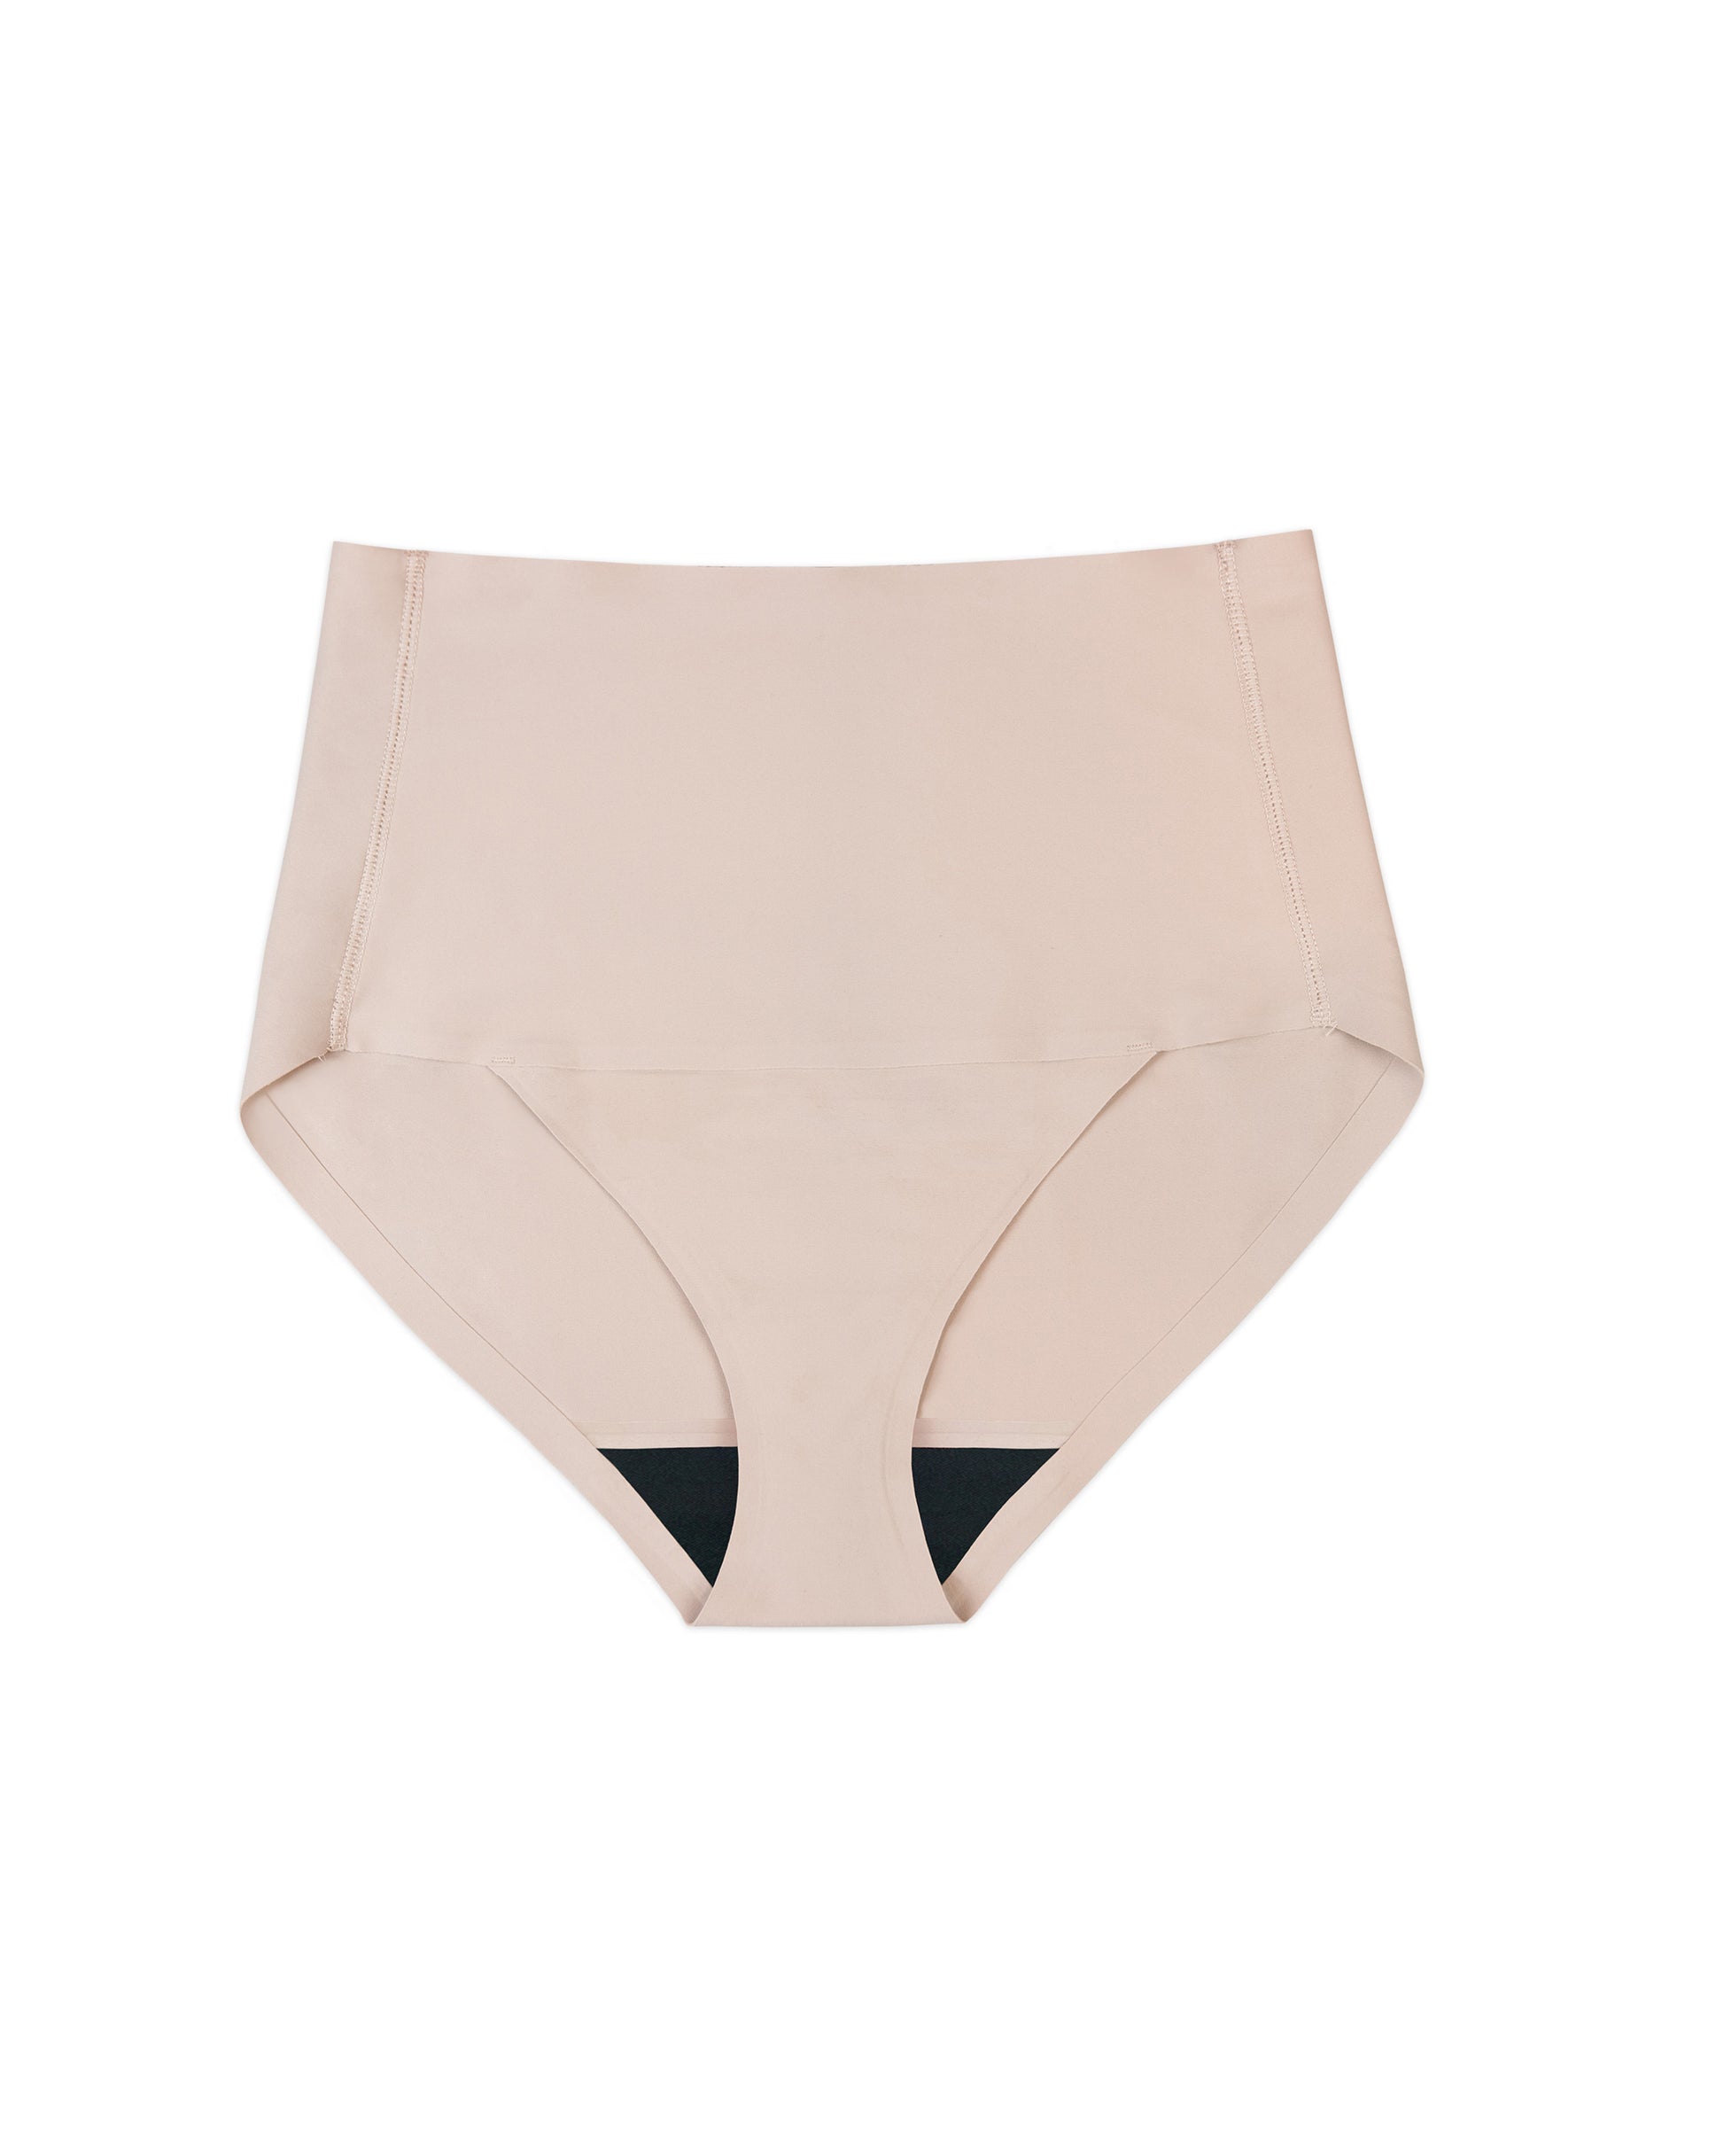 zxcvb High-Waisted Leak Proof Panties Women's Incontinence